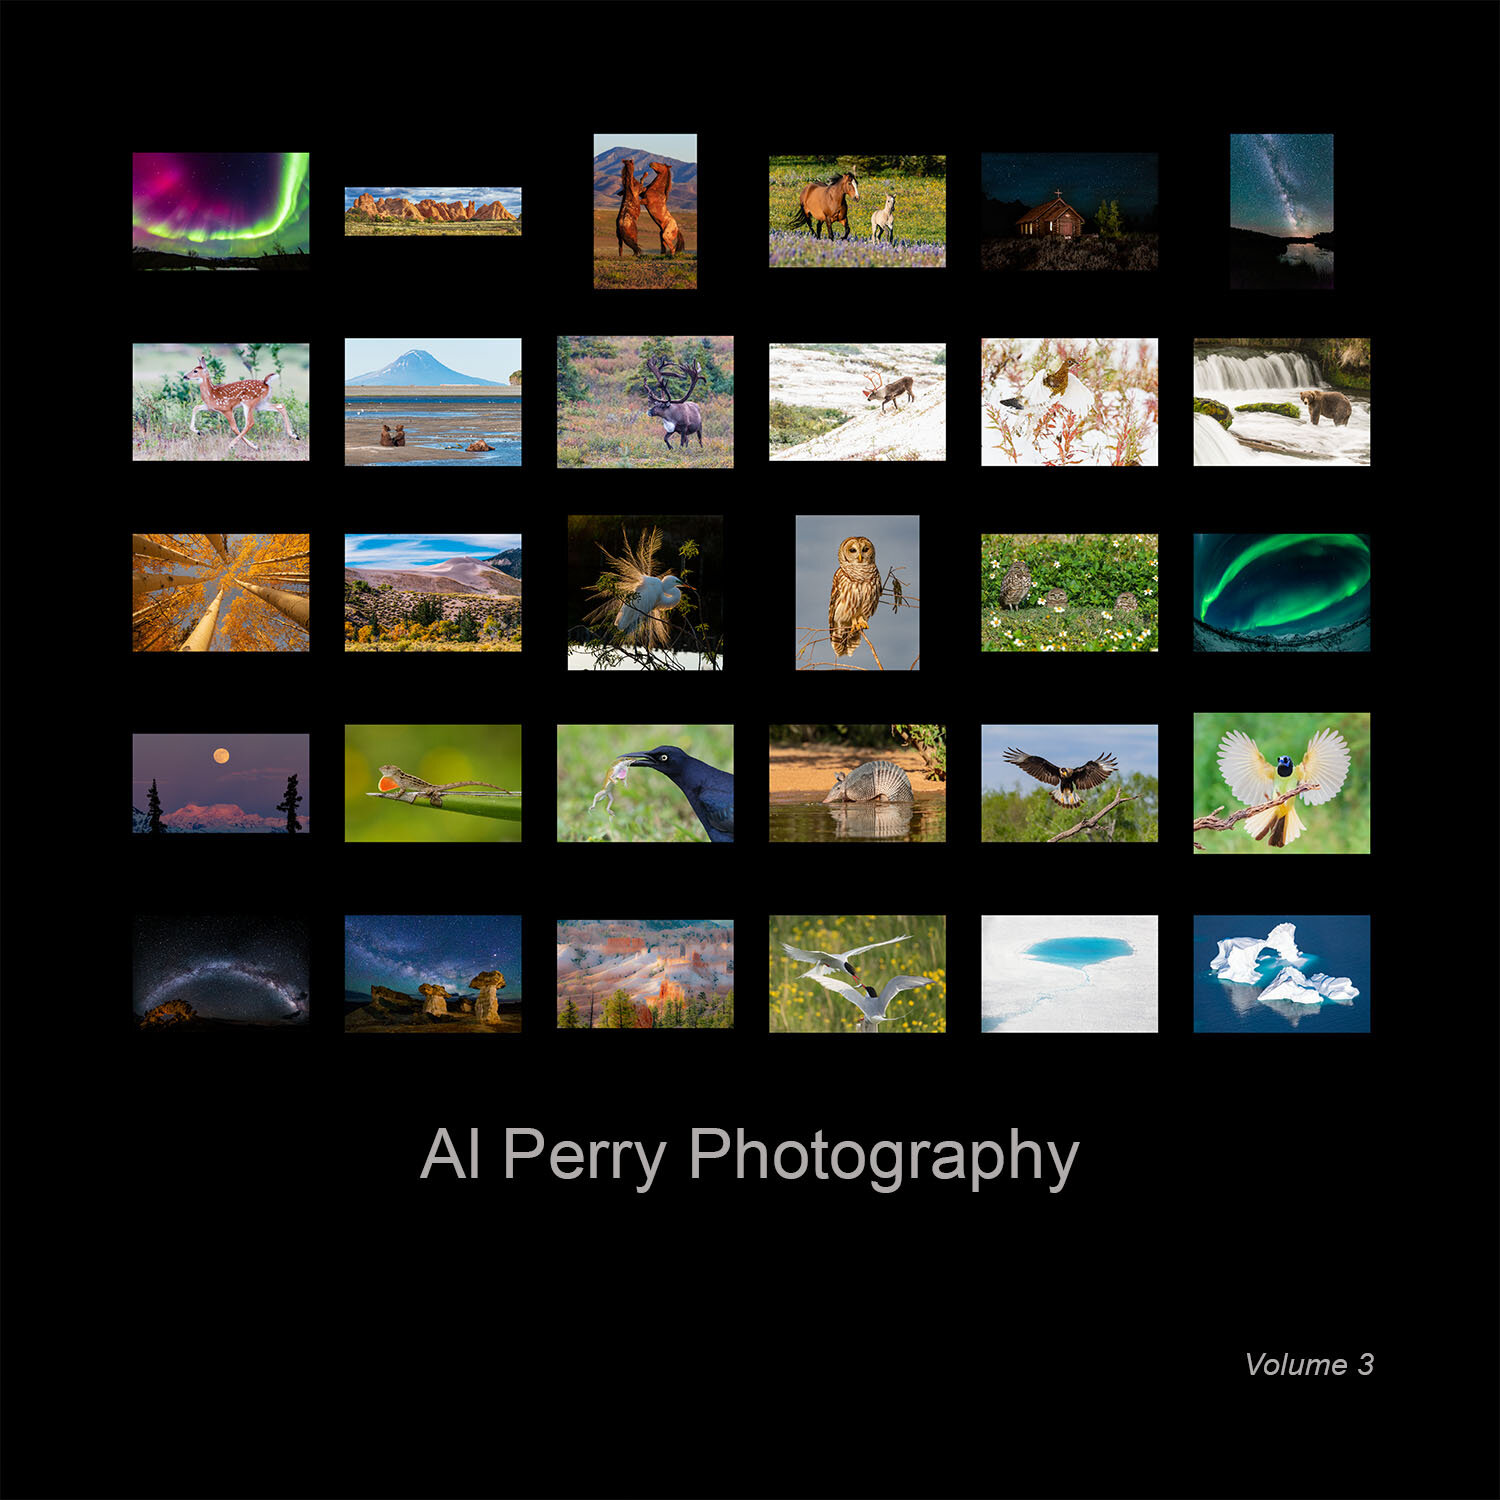 Al Perry Photography Volume 3